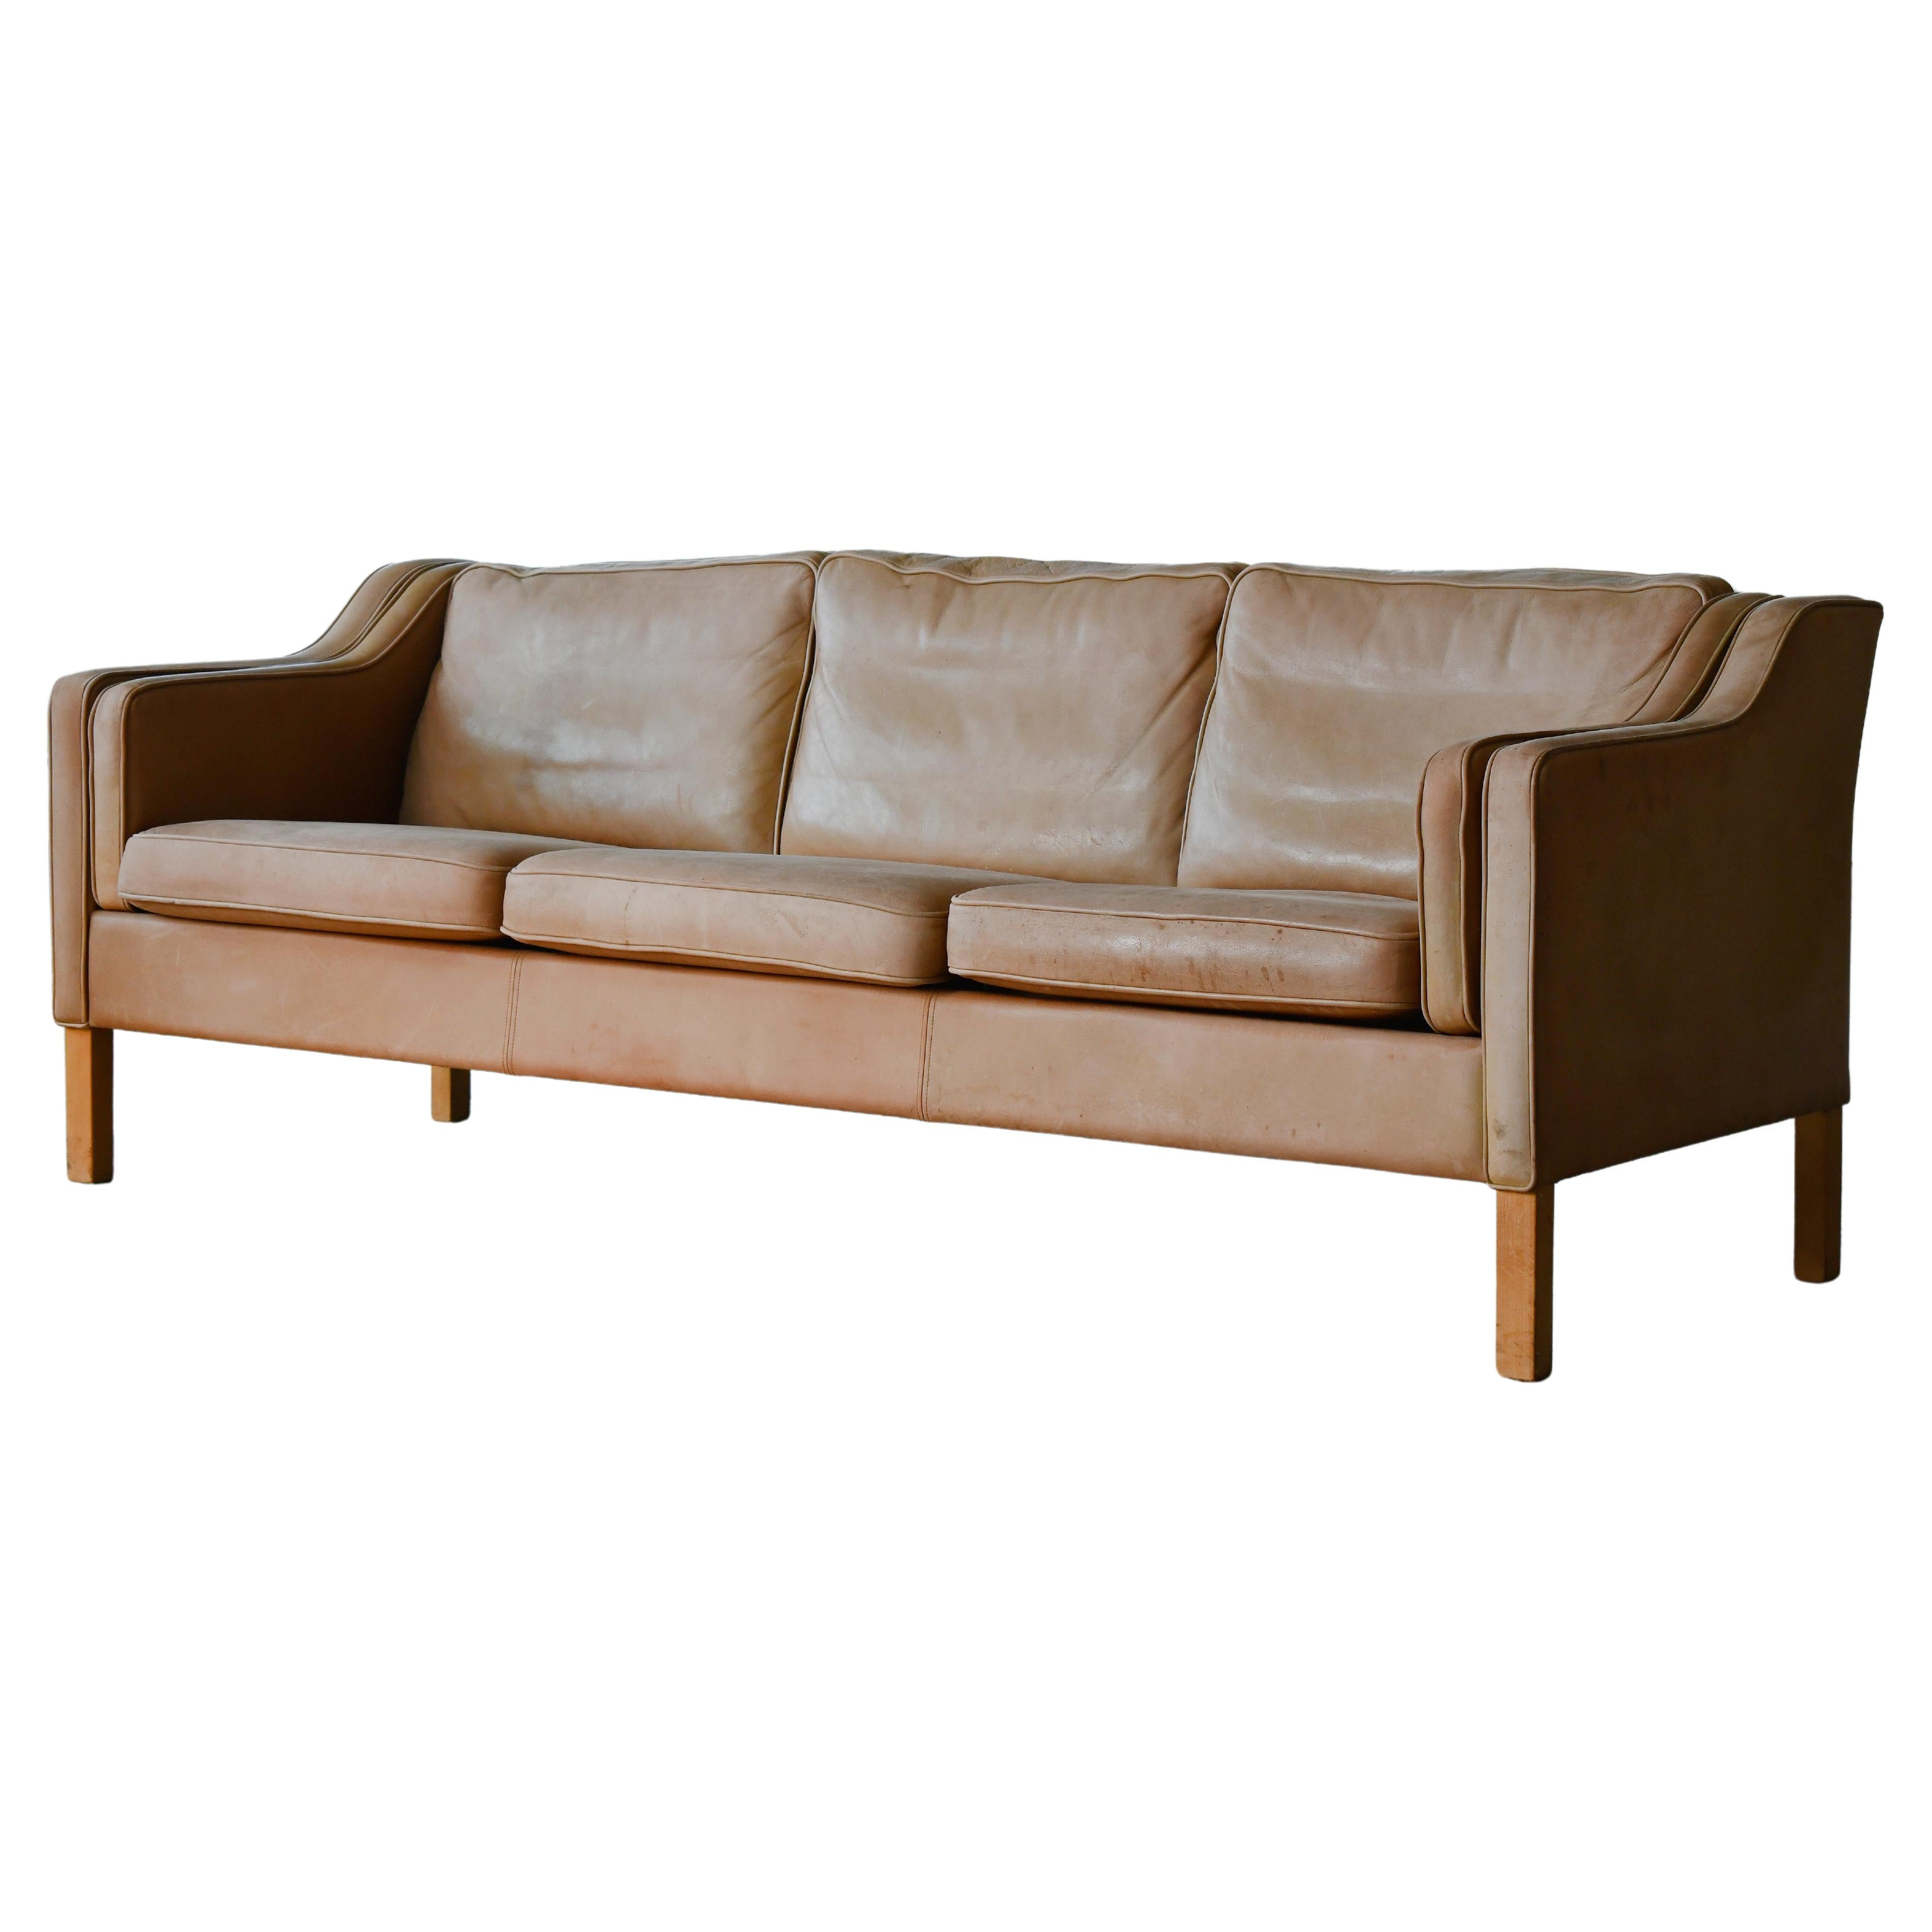 Borge Mogensen Style Model 2213 Three-Seat Sofa in Cream Leather by Stouby 